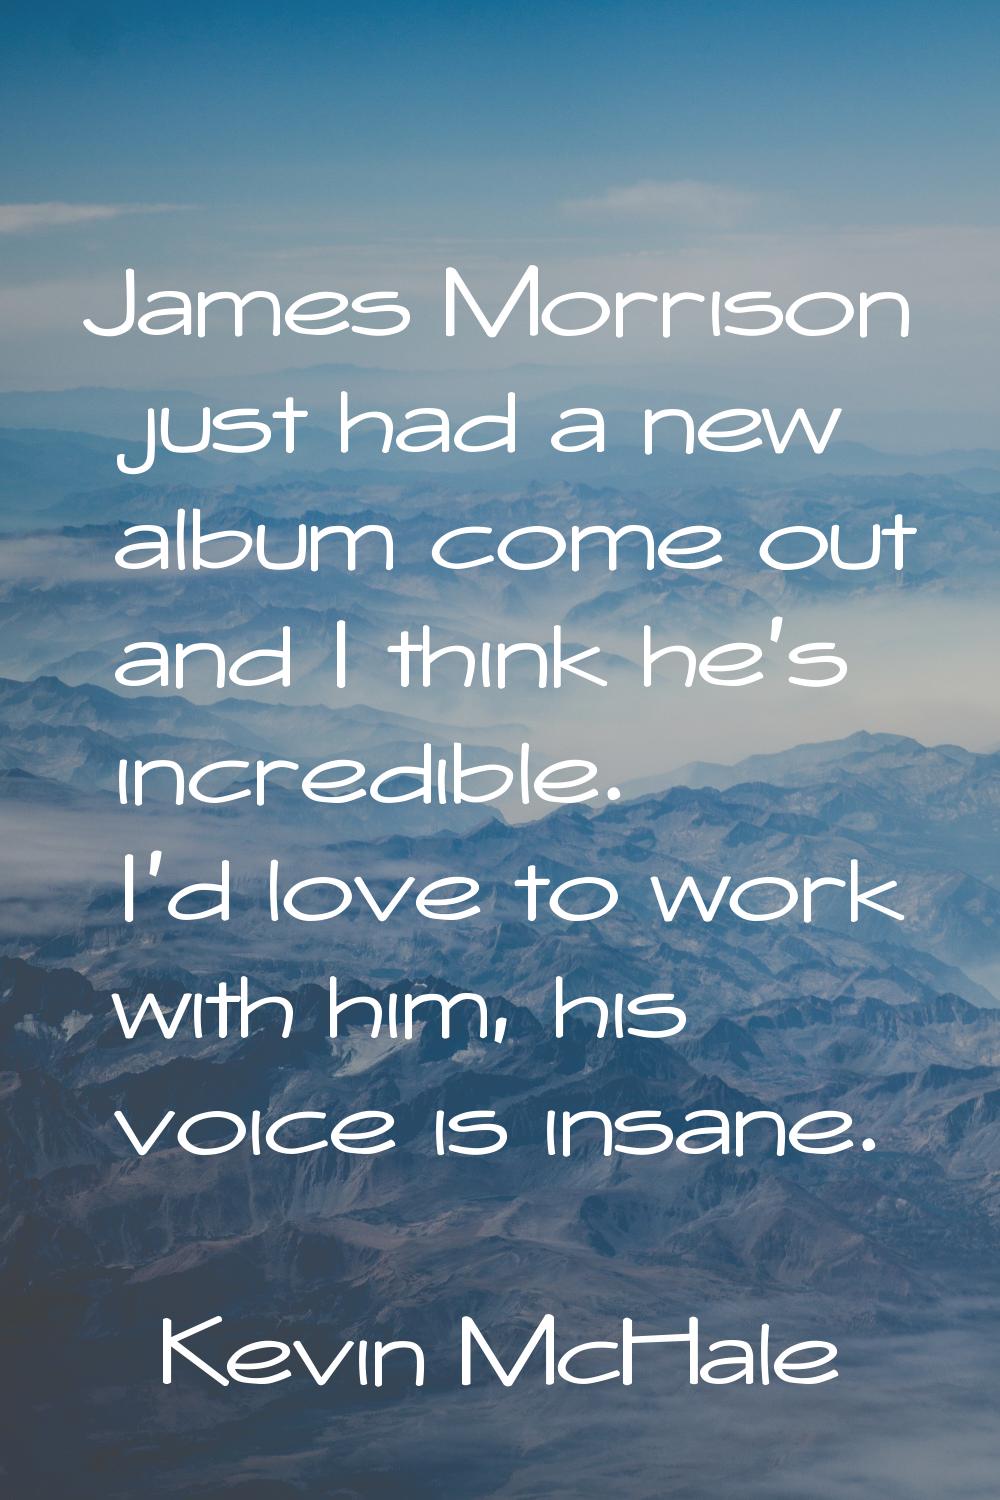 James Morrison just had a new album come out and I think he's incredible. I'd love to work with him